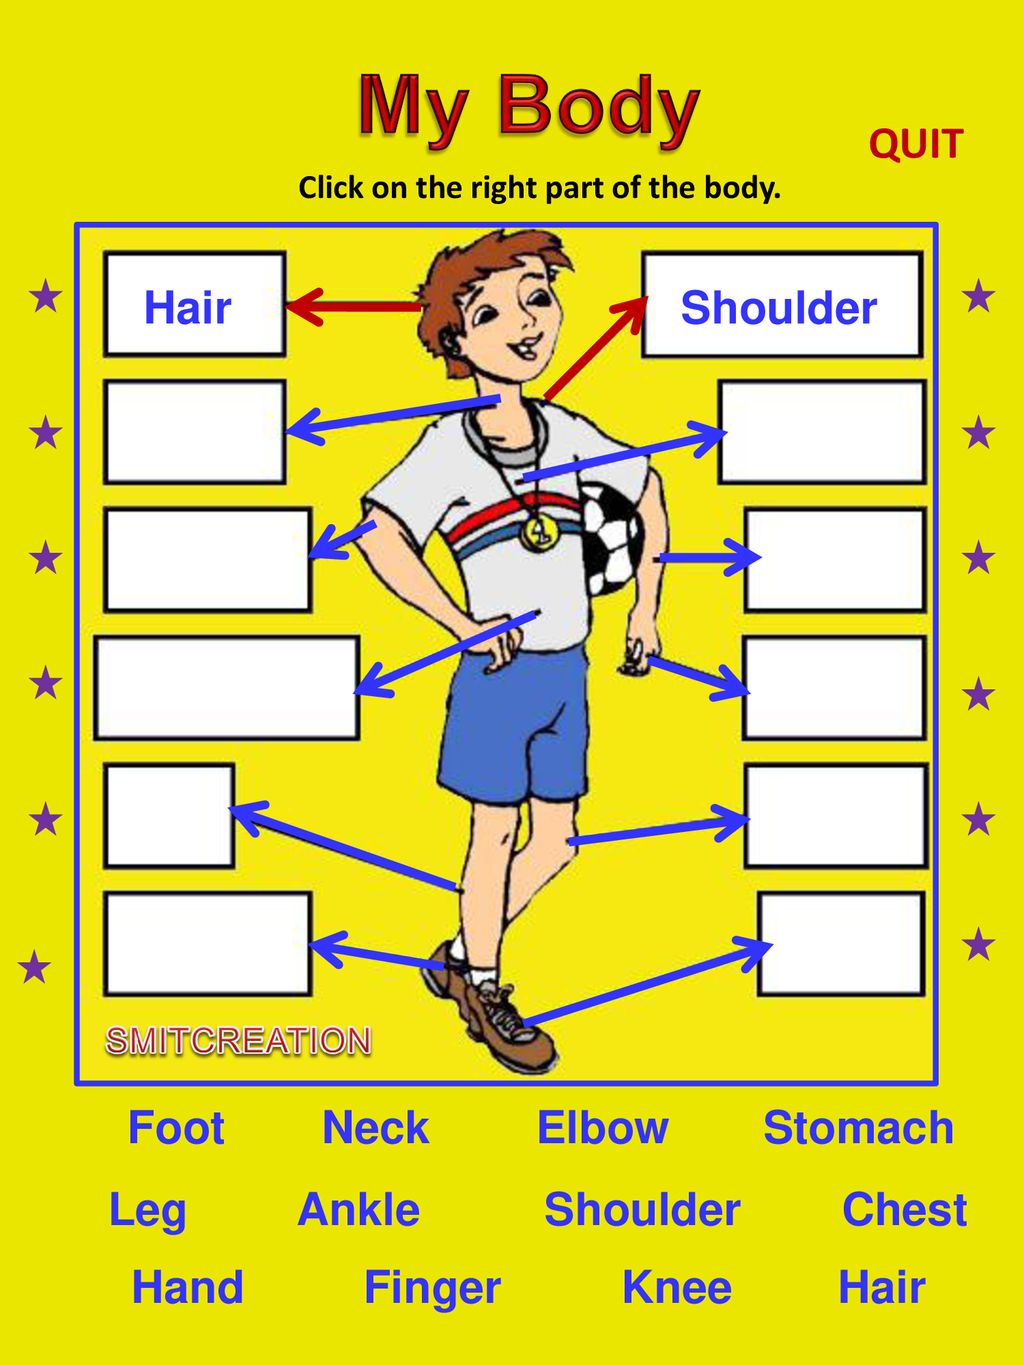 Can use the body. My body, your body: hair. Body Parts на английском. Parts of the body презентация. Parts of the body упражнения.